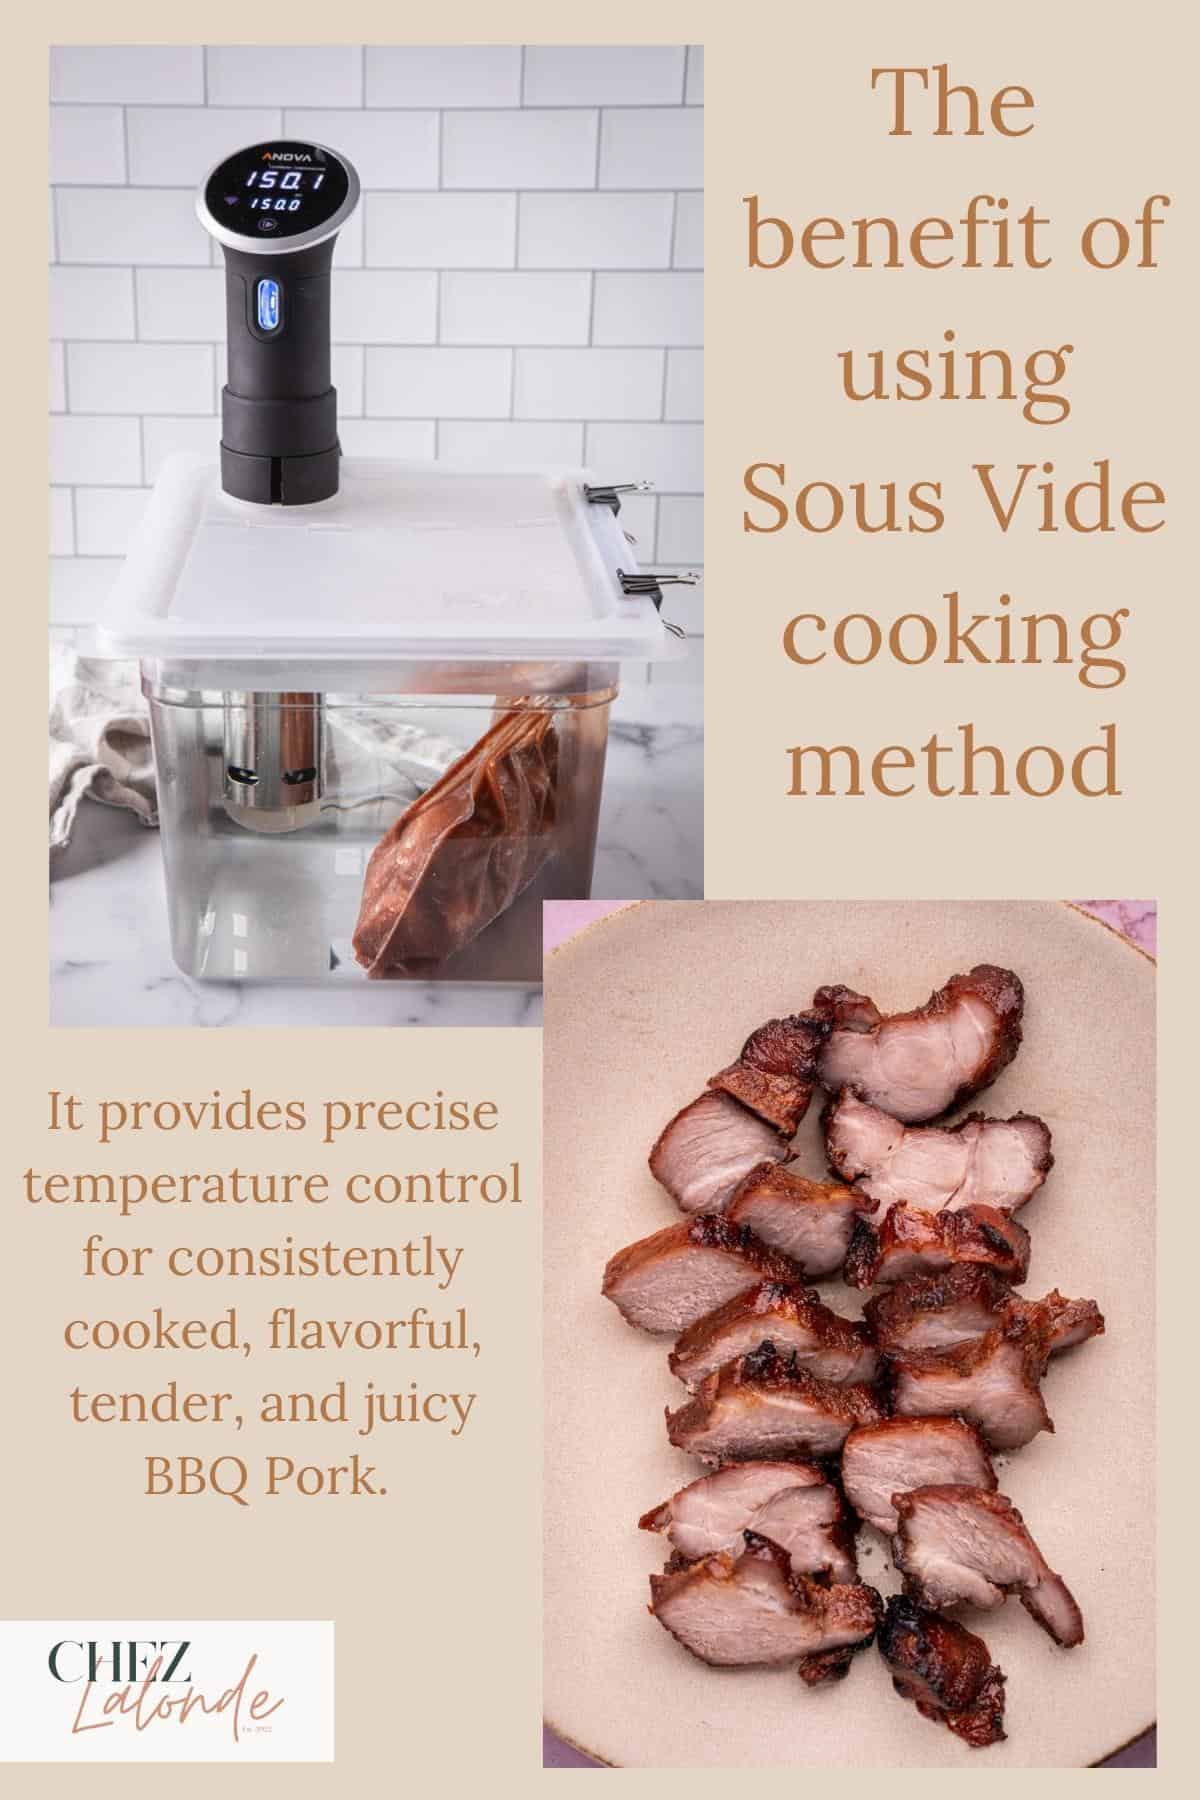 Photo that describe why Sous Vide is good and showing how Sous Vide cooking can produce succulent meat. 